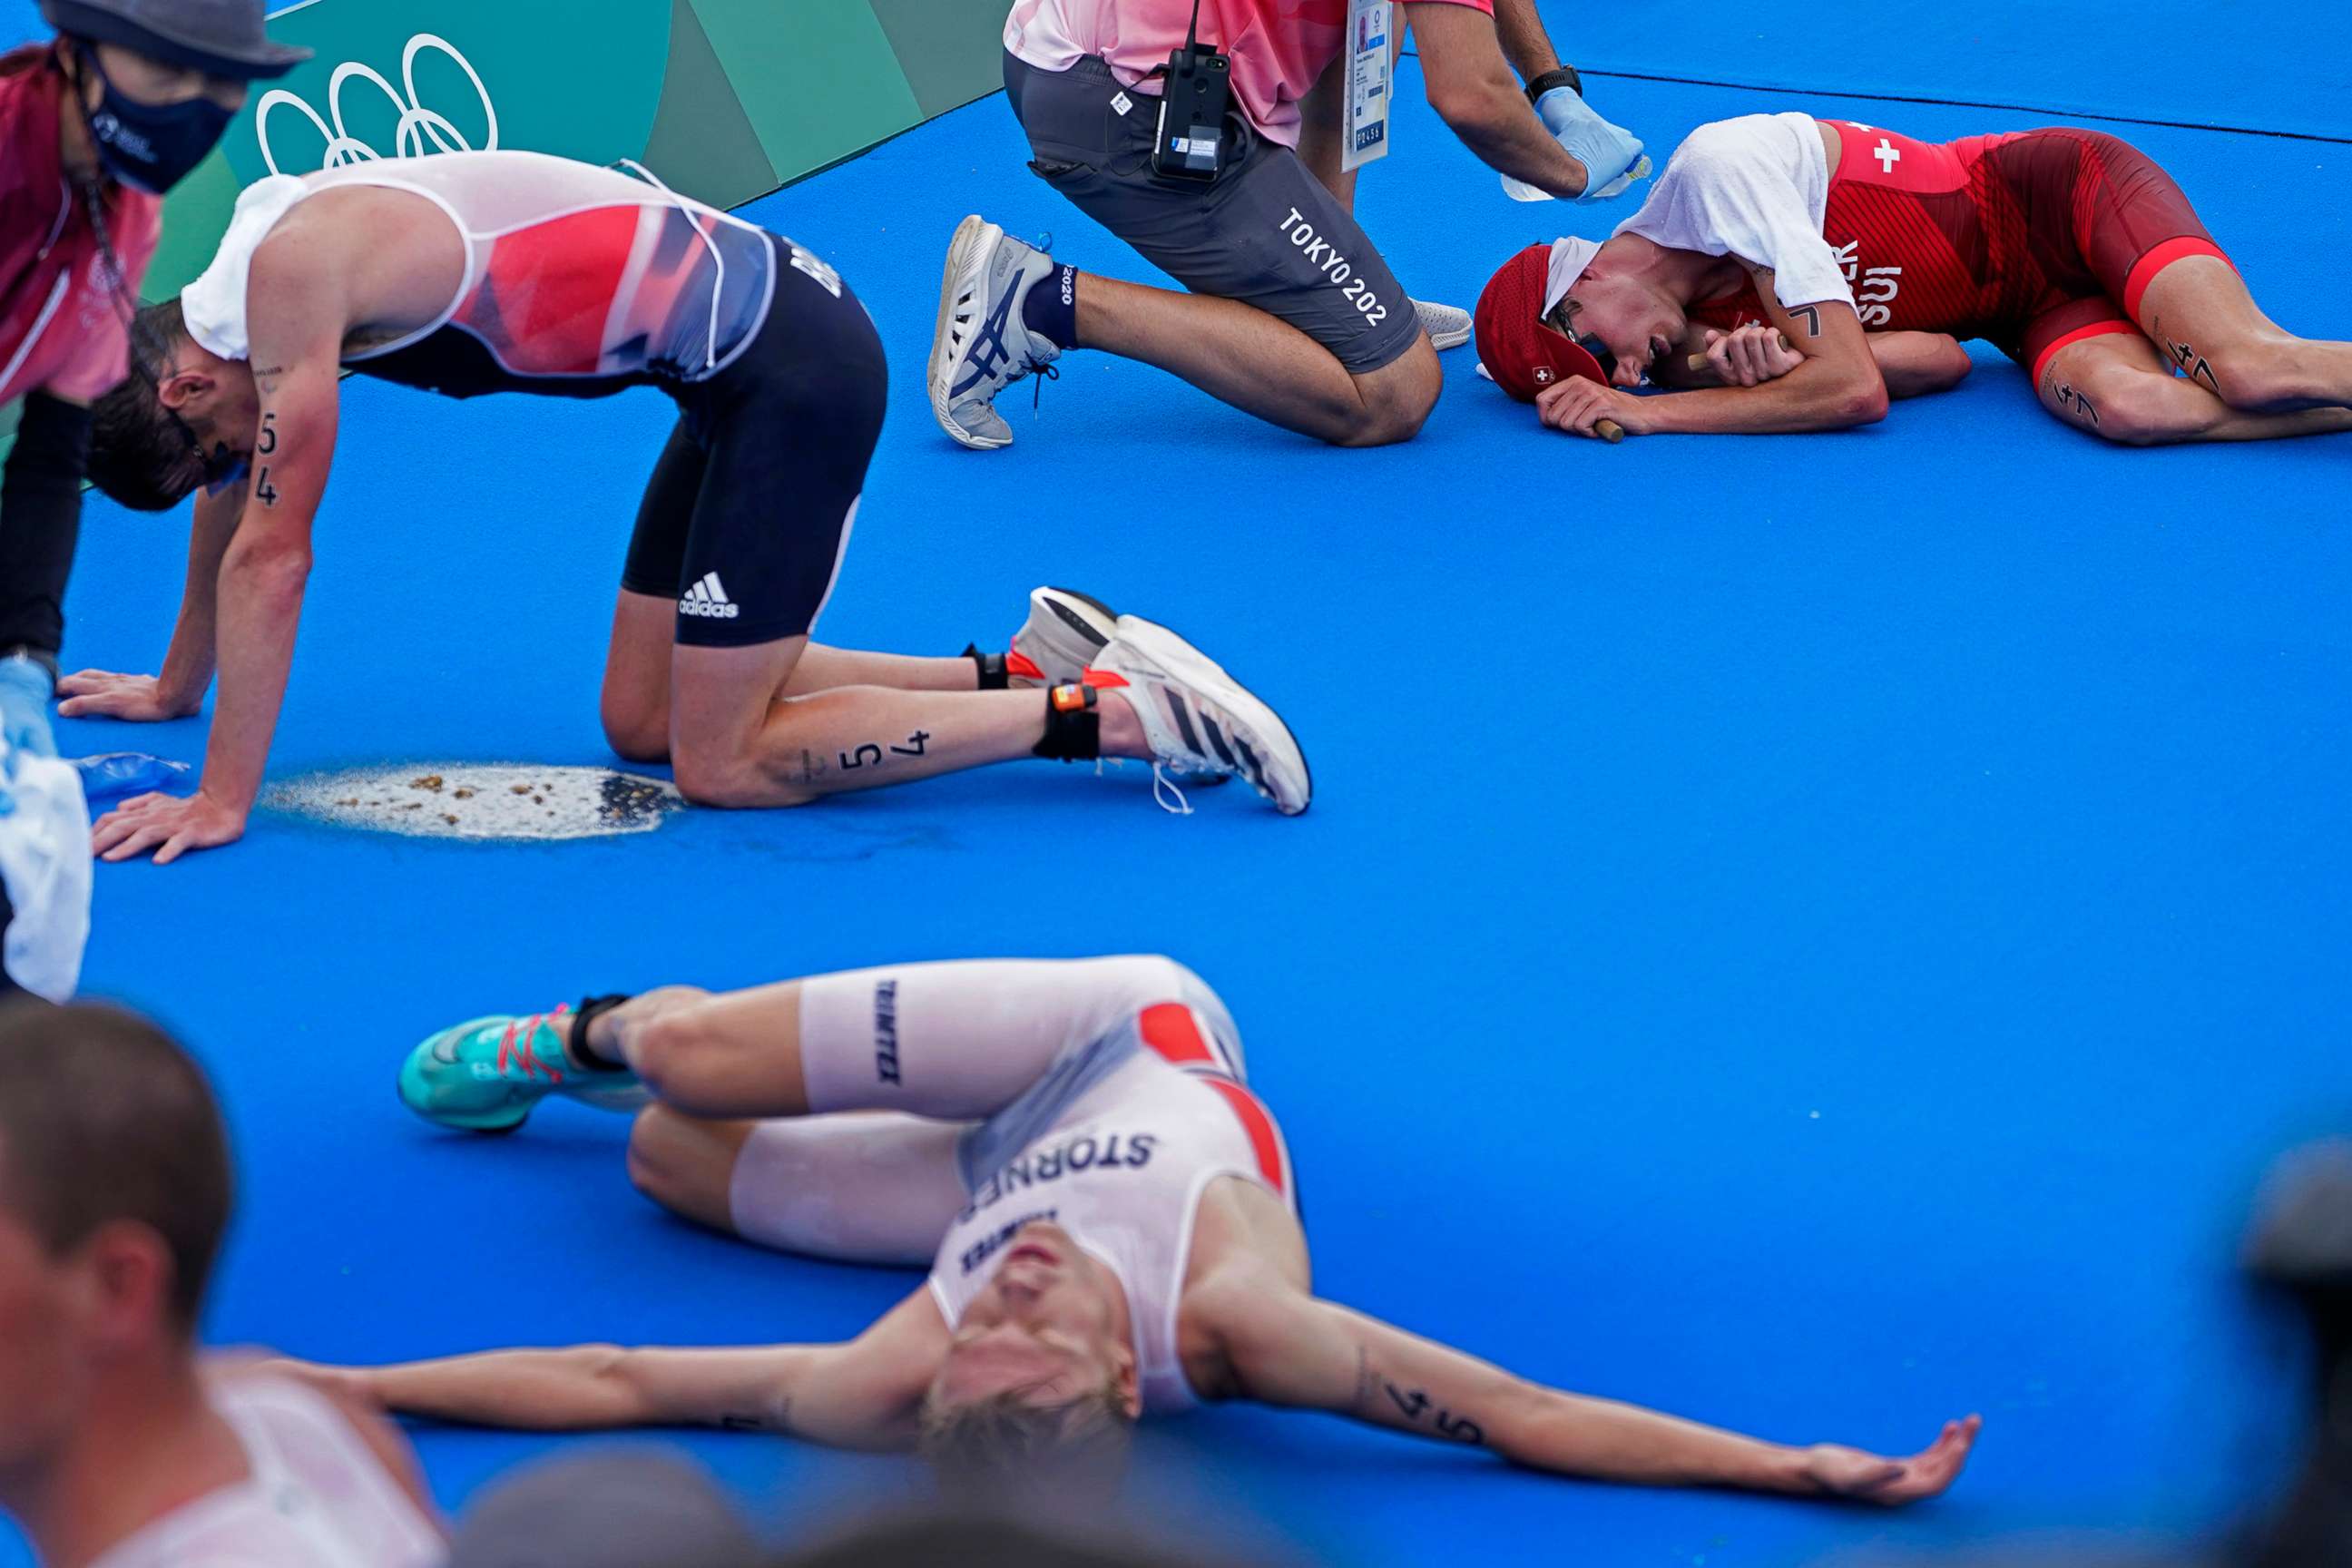 PHOTO: Max Studer, of Switzerland, is tended to after collapsing along with several other athletes, after finishing the men's individual triathlon at the 2020 Summer Olympics, July 26, 2021, in Tokyo.